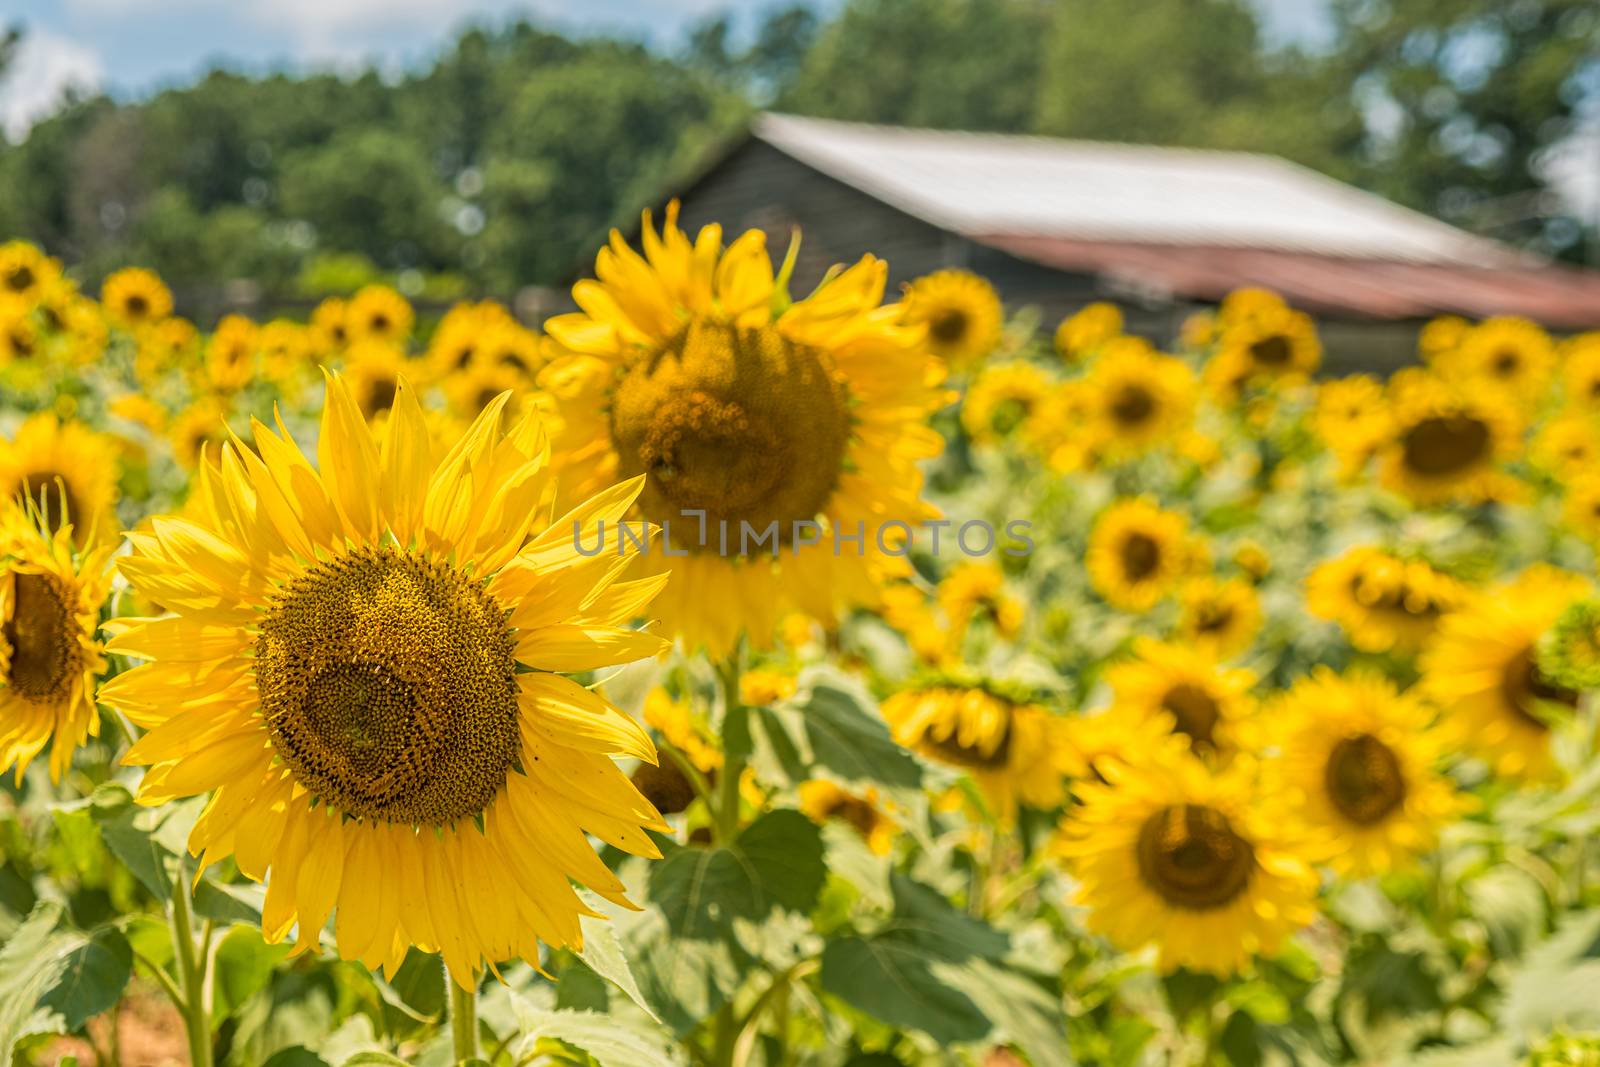 An image from a beutiful summer field full of bright yellow and green sunflowers